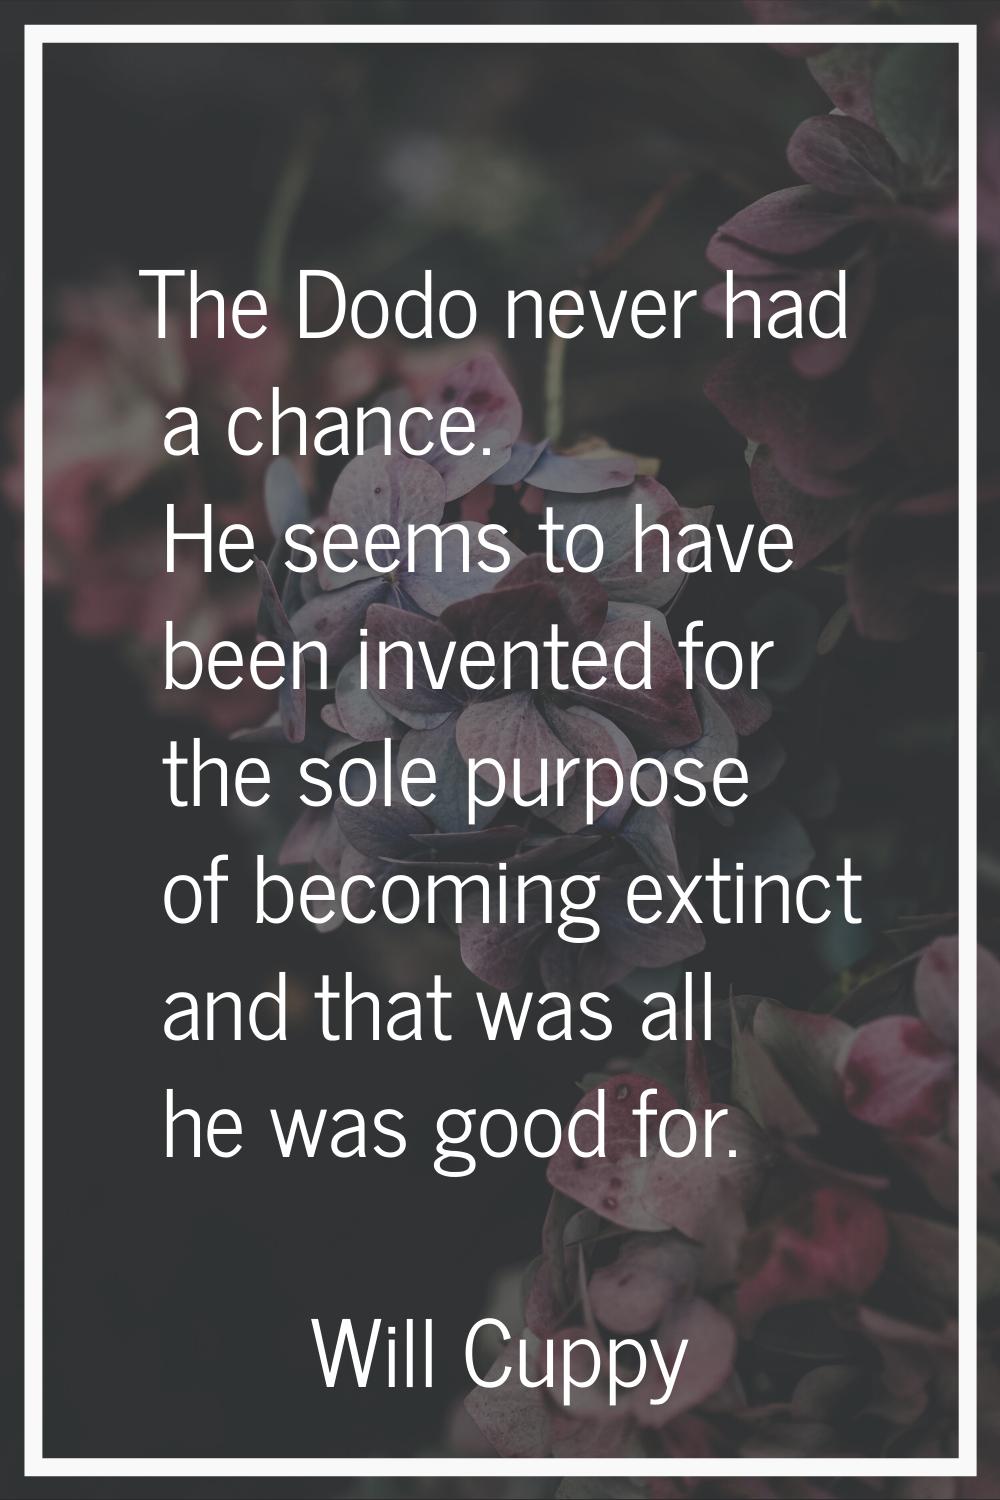 The Dodo never had a chance. He seems to have been invented for the sole purpose of becoming extinc